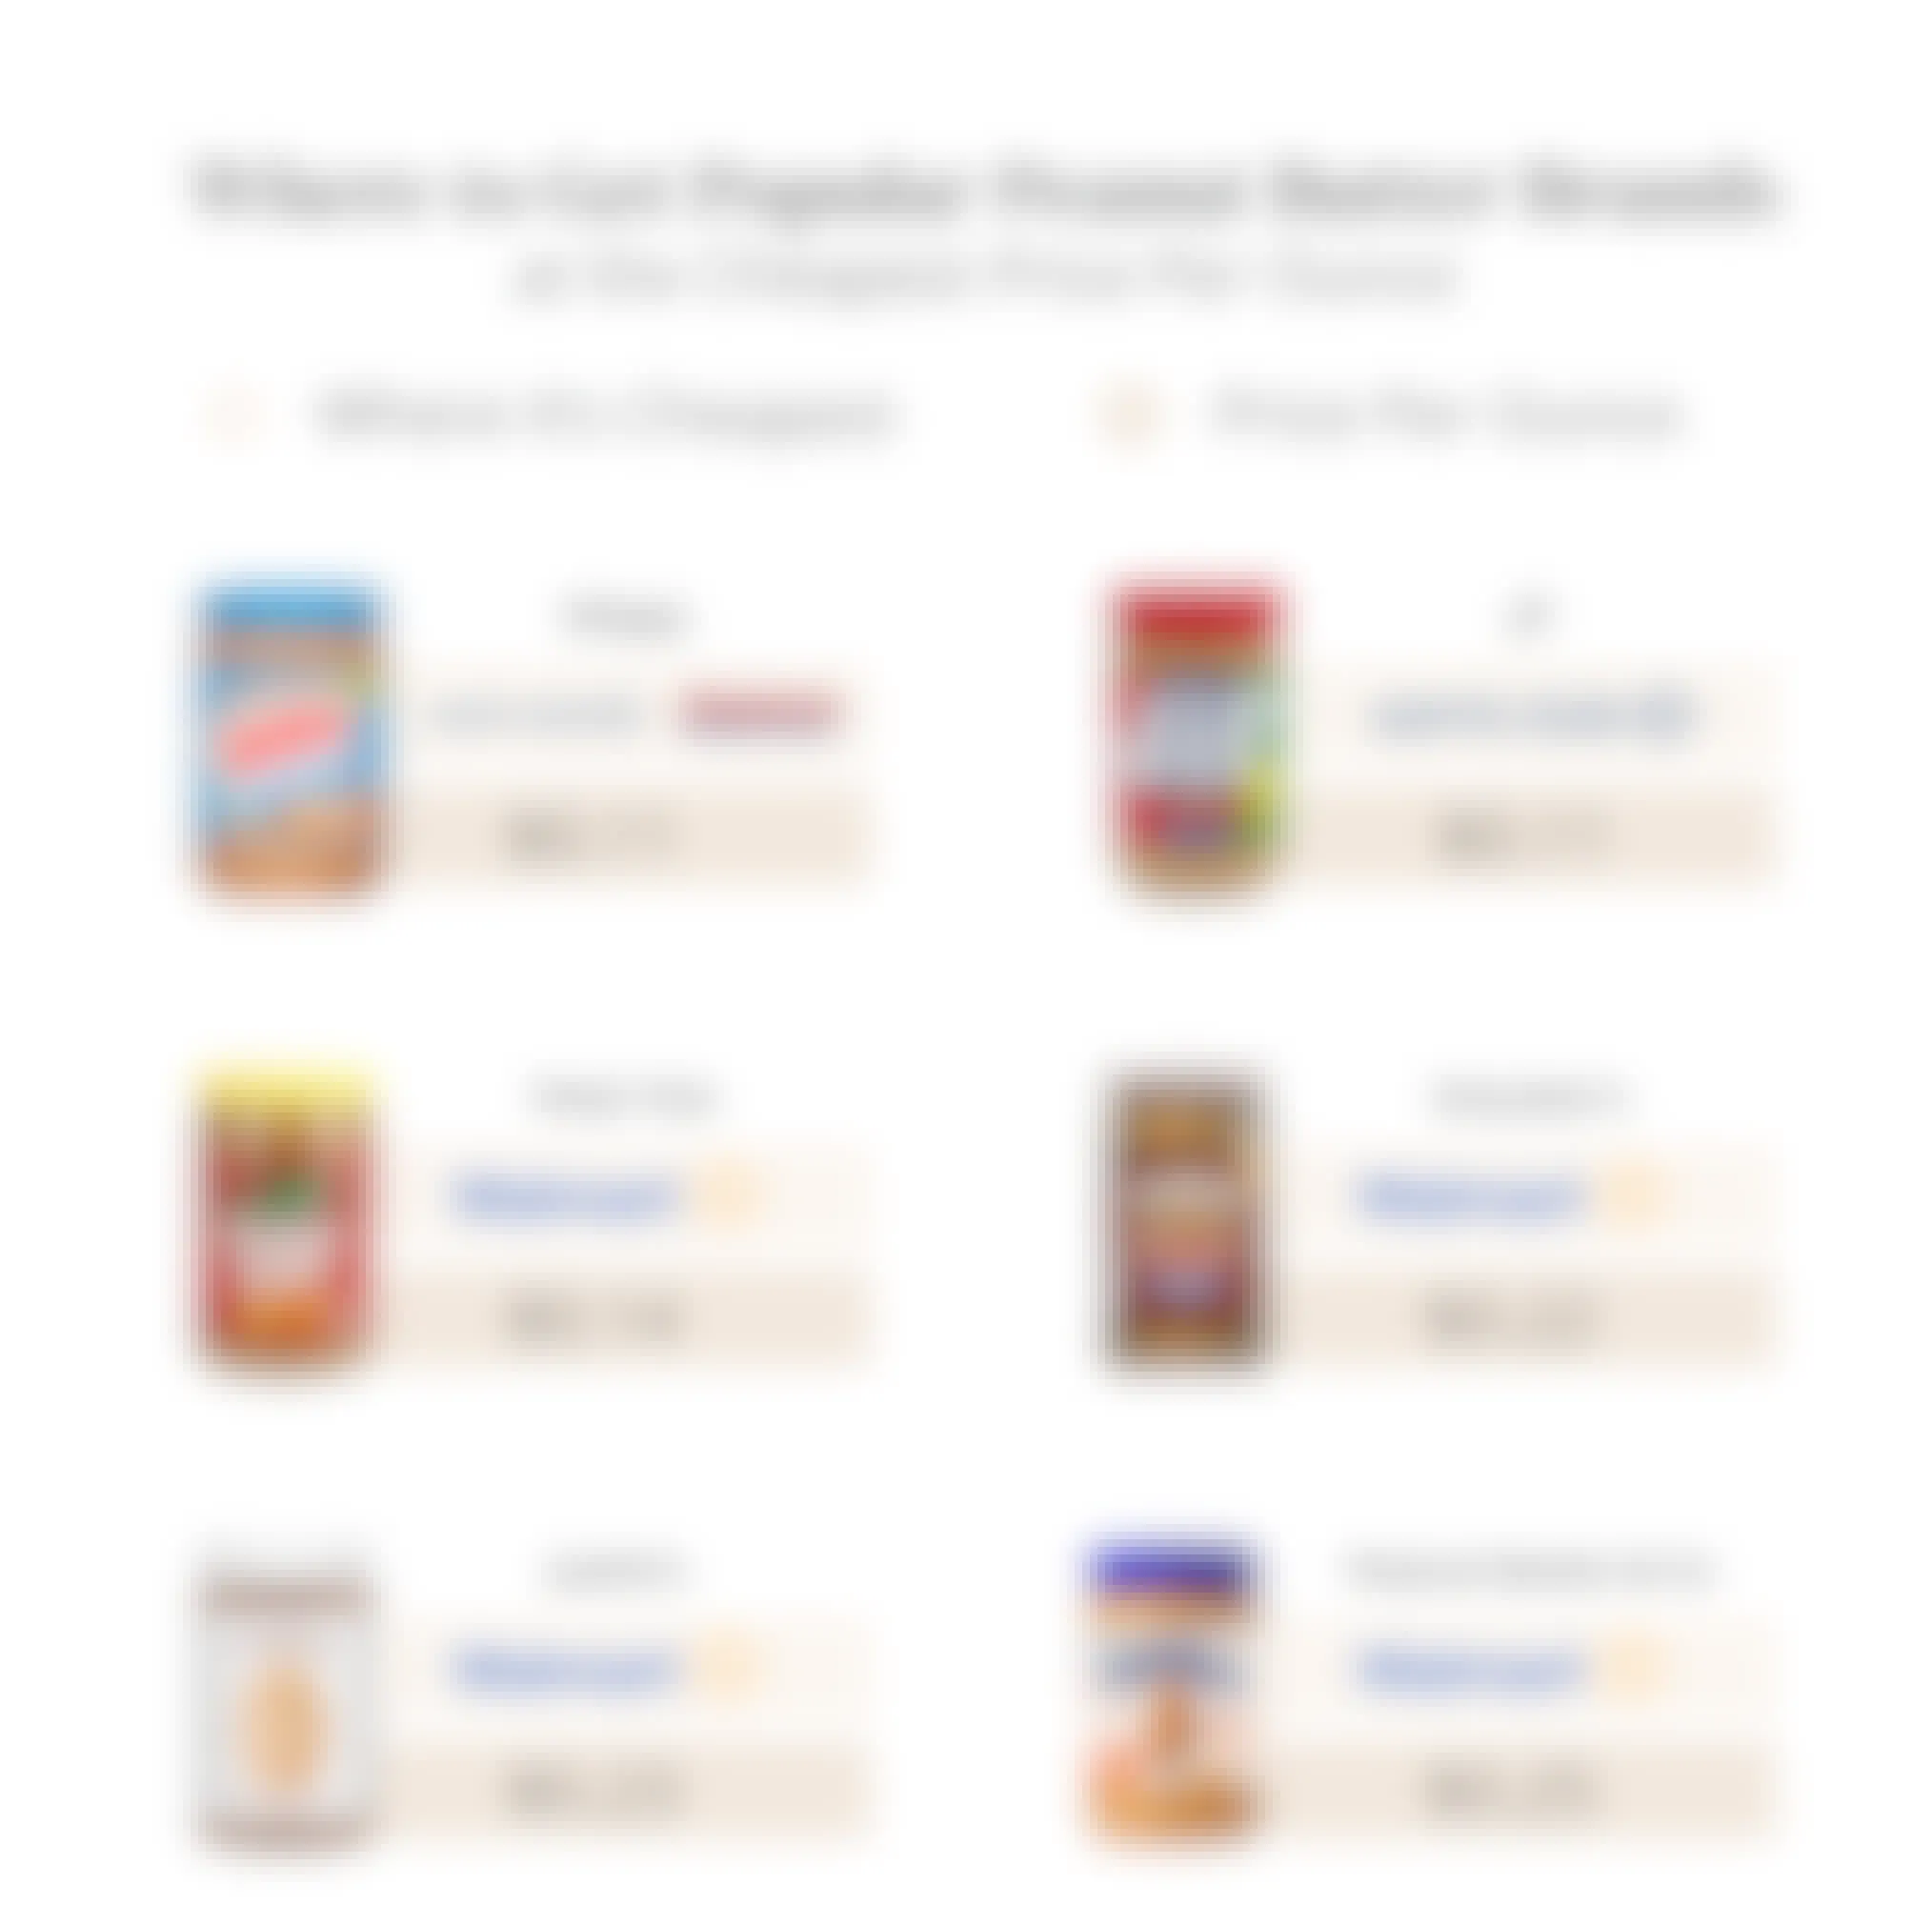 peanut-butter-cost-where-to-get-popular-brands